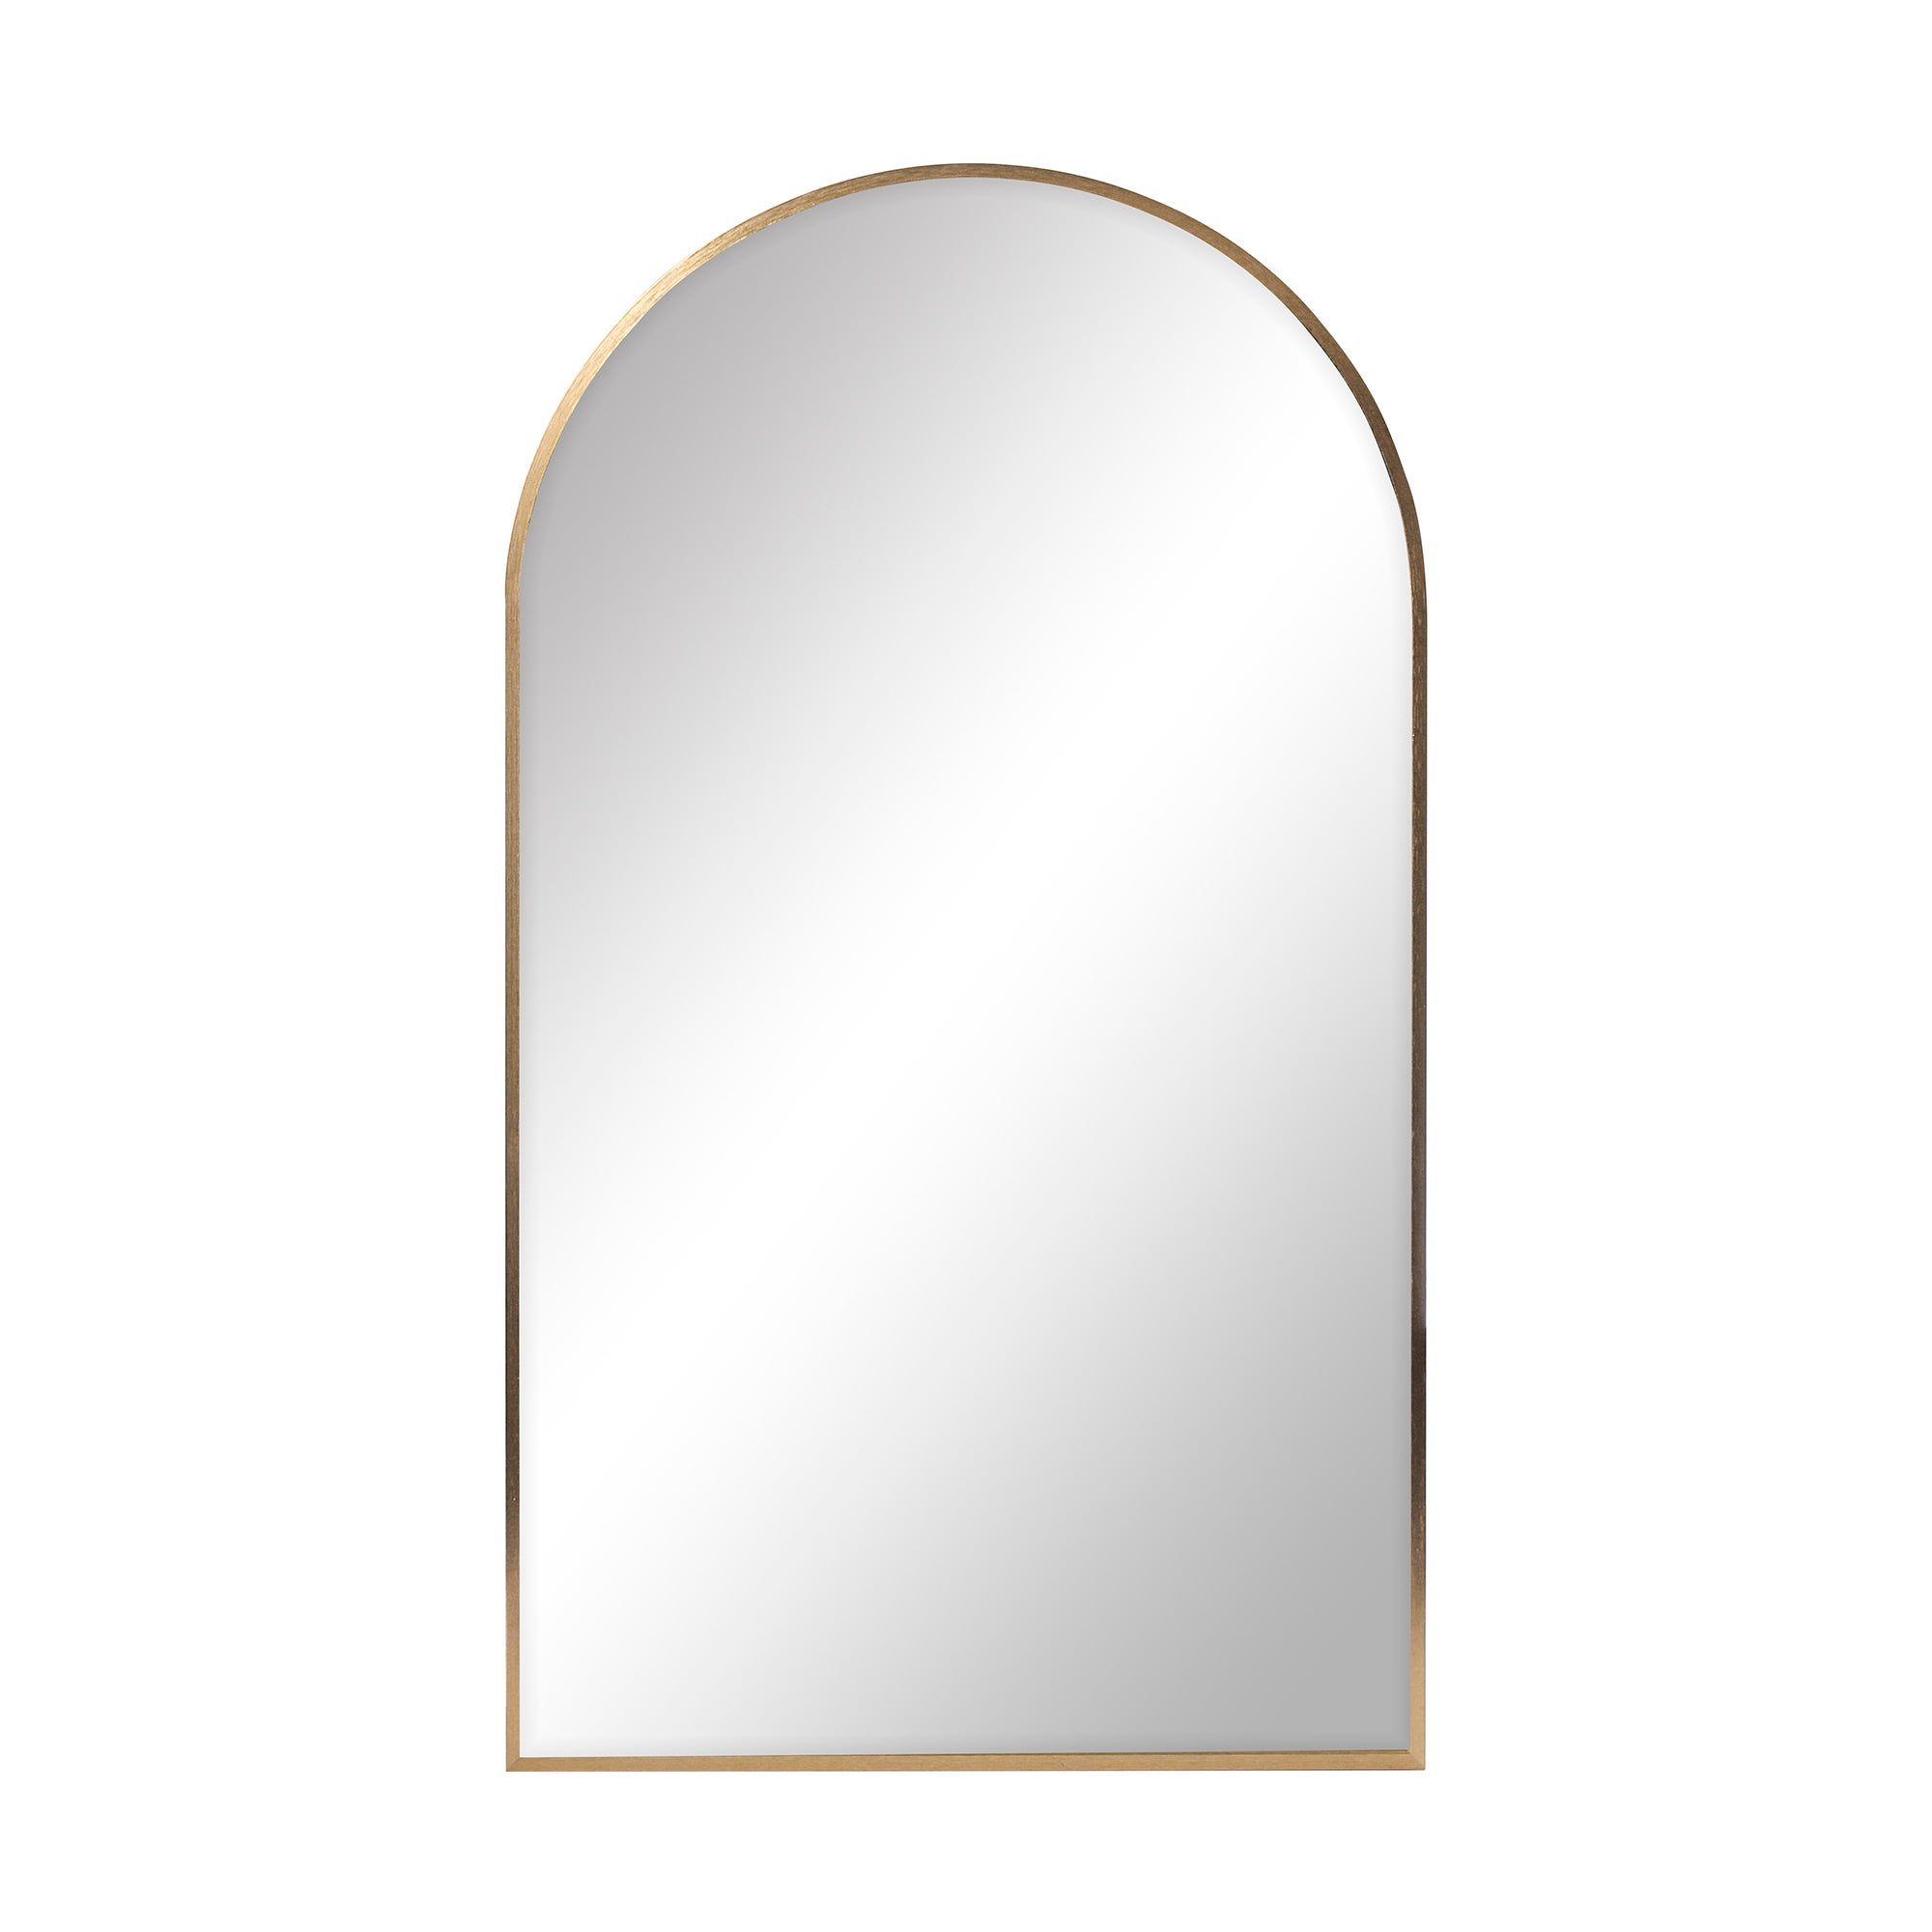 Cooper & Co. Naomi 80cm Arched Wall Mirror Gold